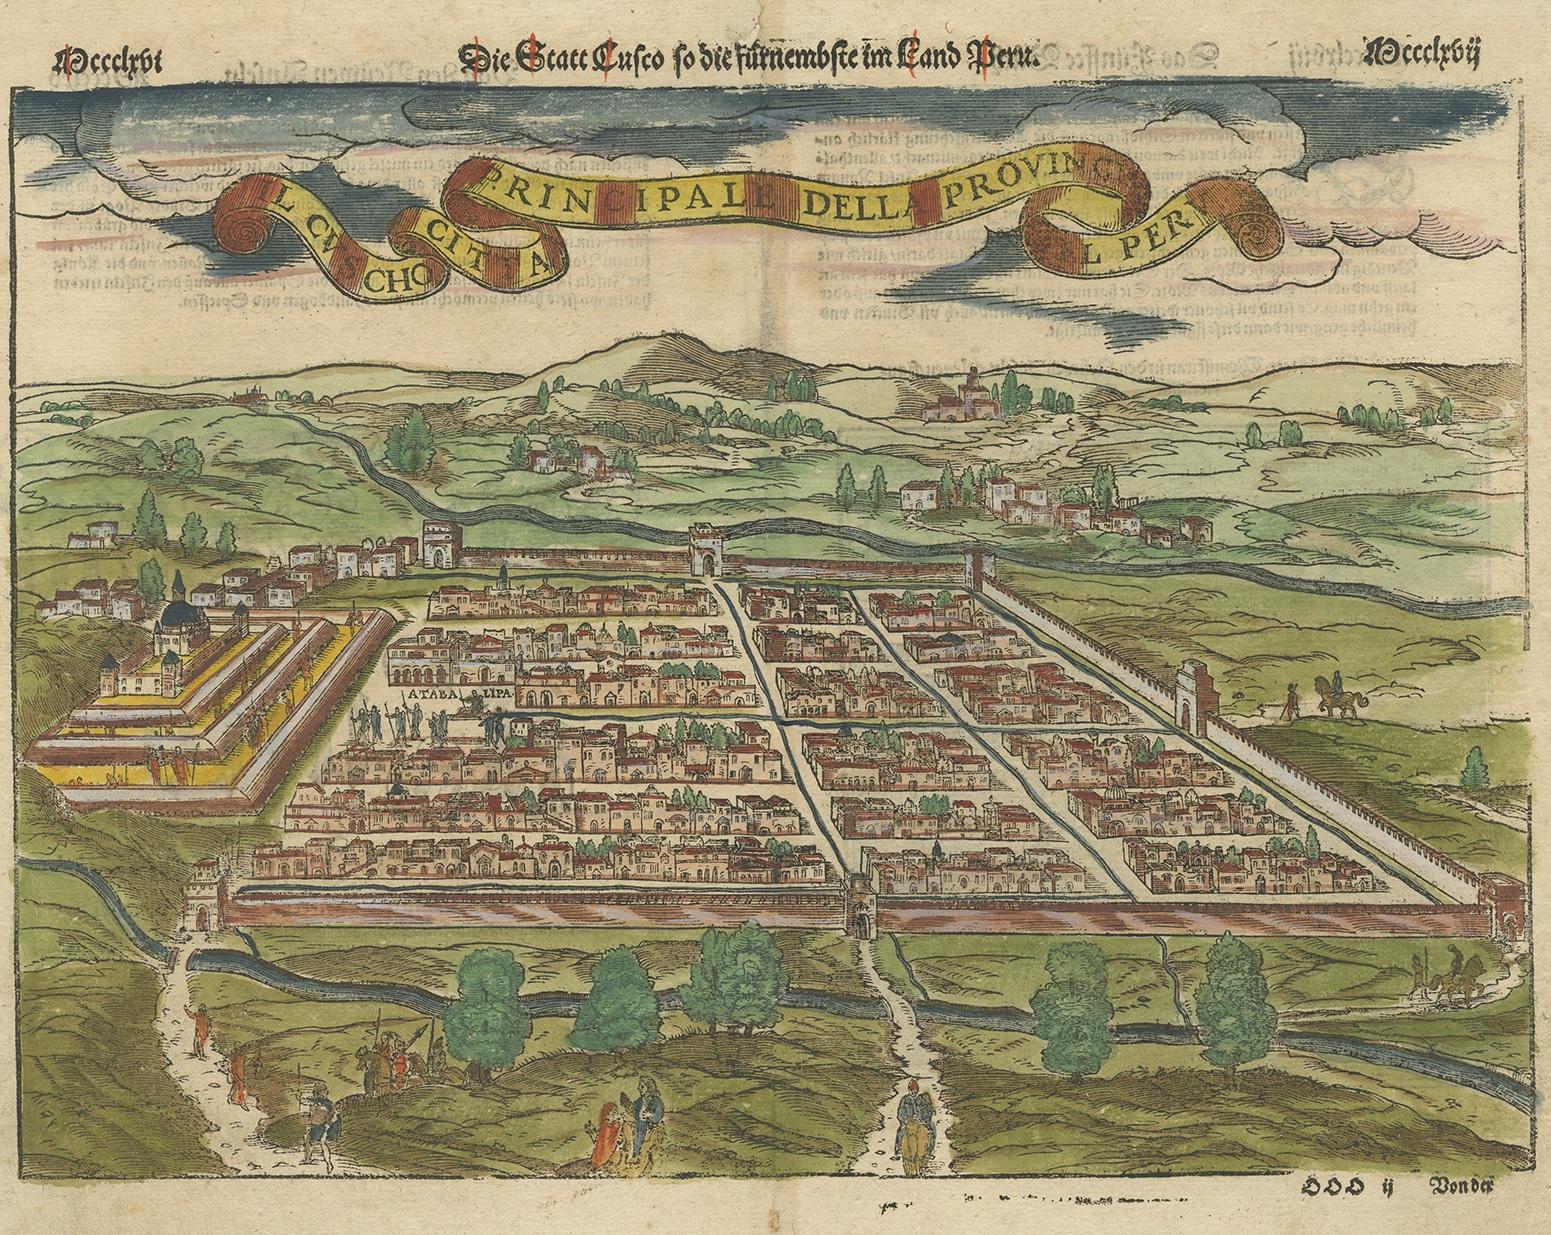 Antique print titled 'Die Statt Cusco so die furnemste in Landt Peru ist.' Bird's eye view of Cusco (or Cuzco), a city in Peru and the principal city of the region and province. This print originates from Sebastian Munster's 'Cosmographia,